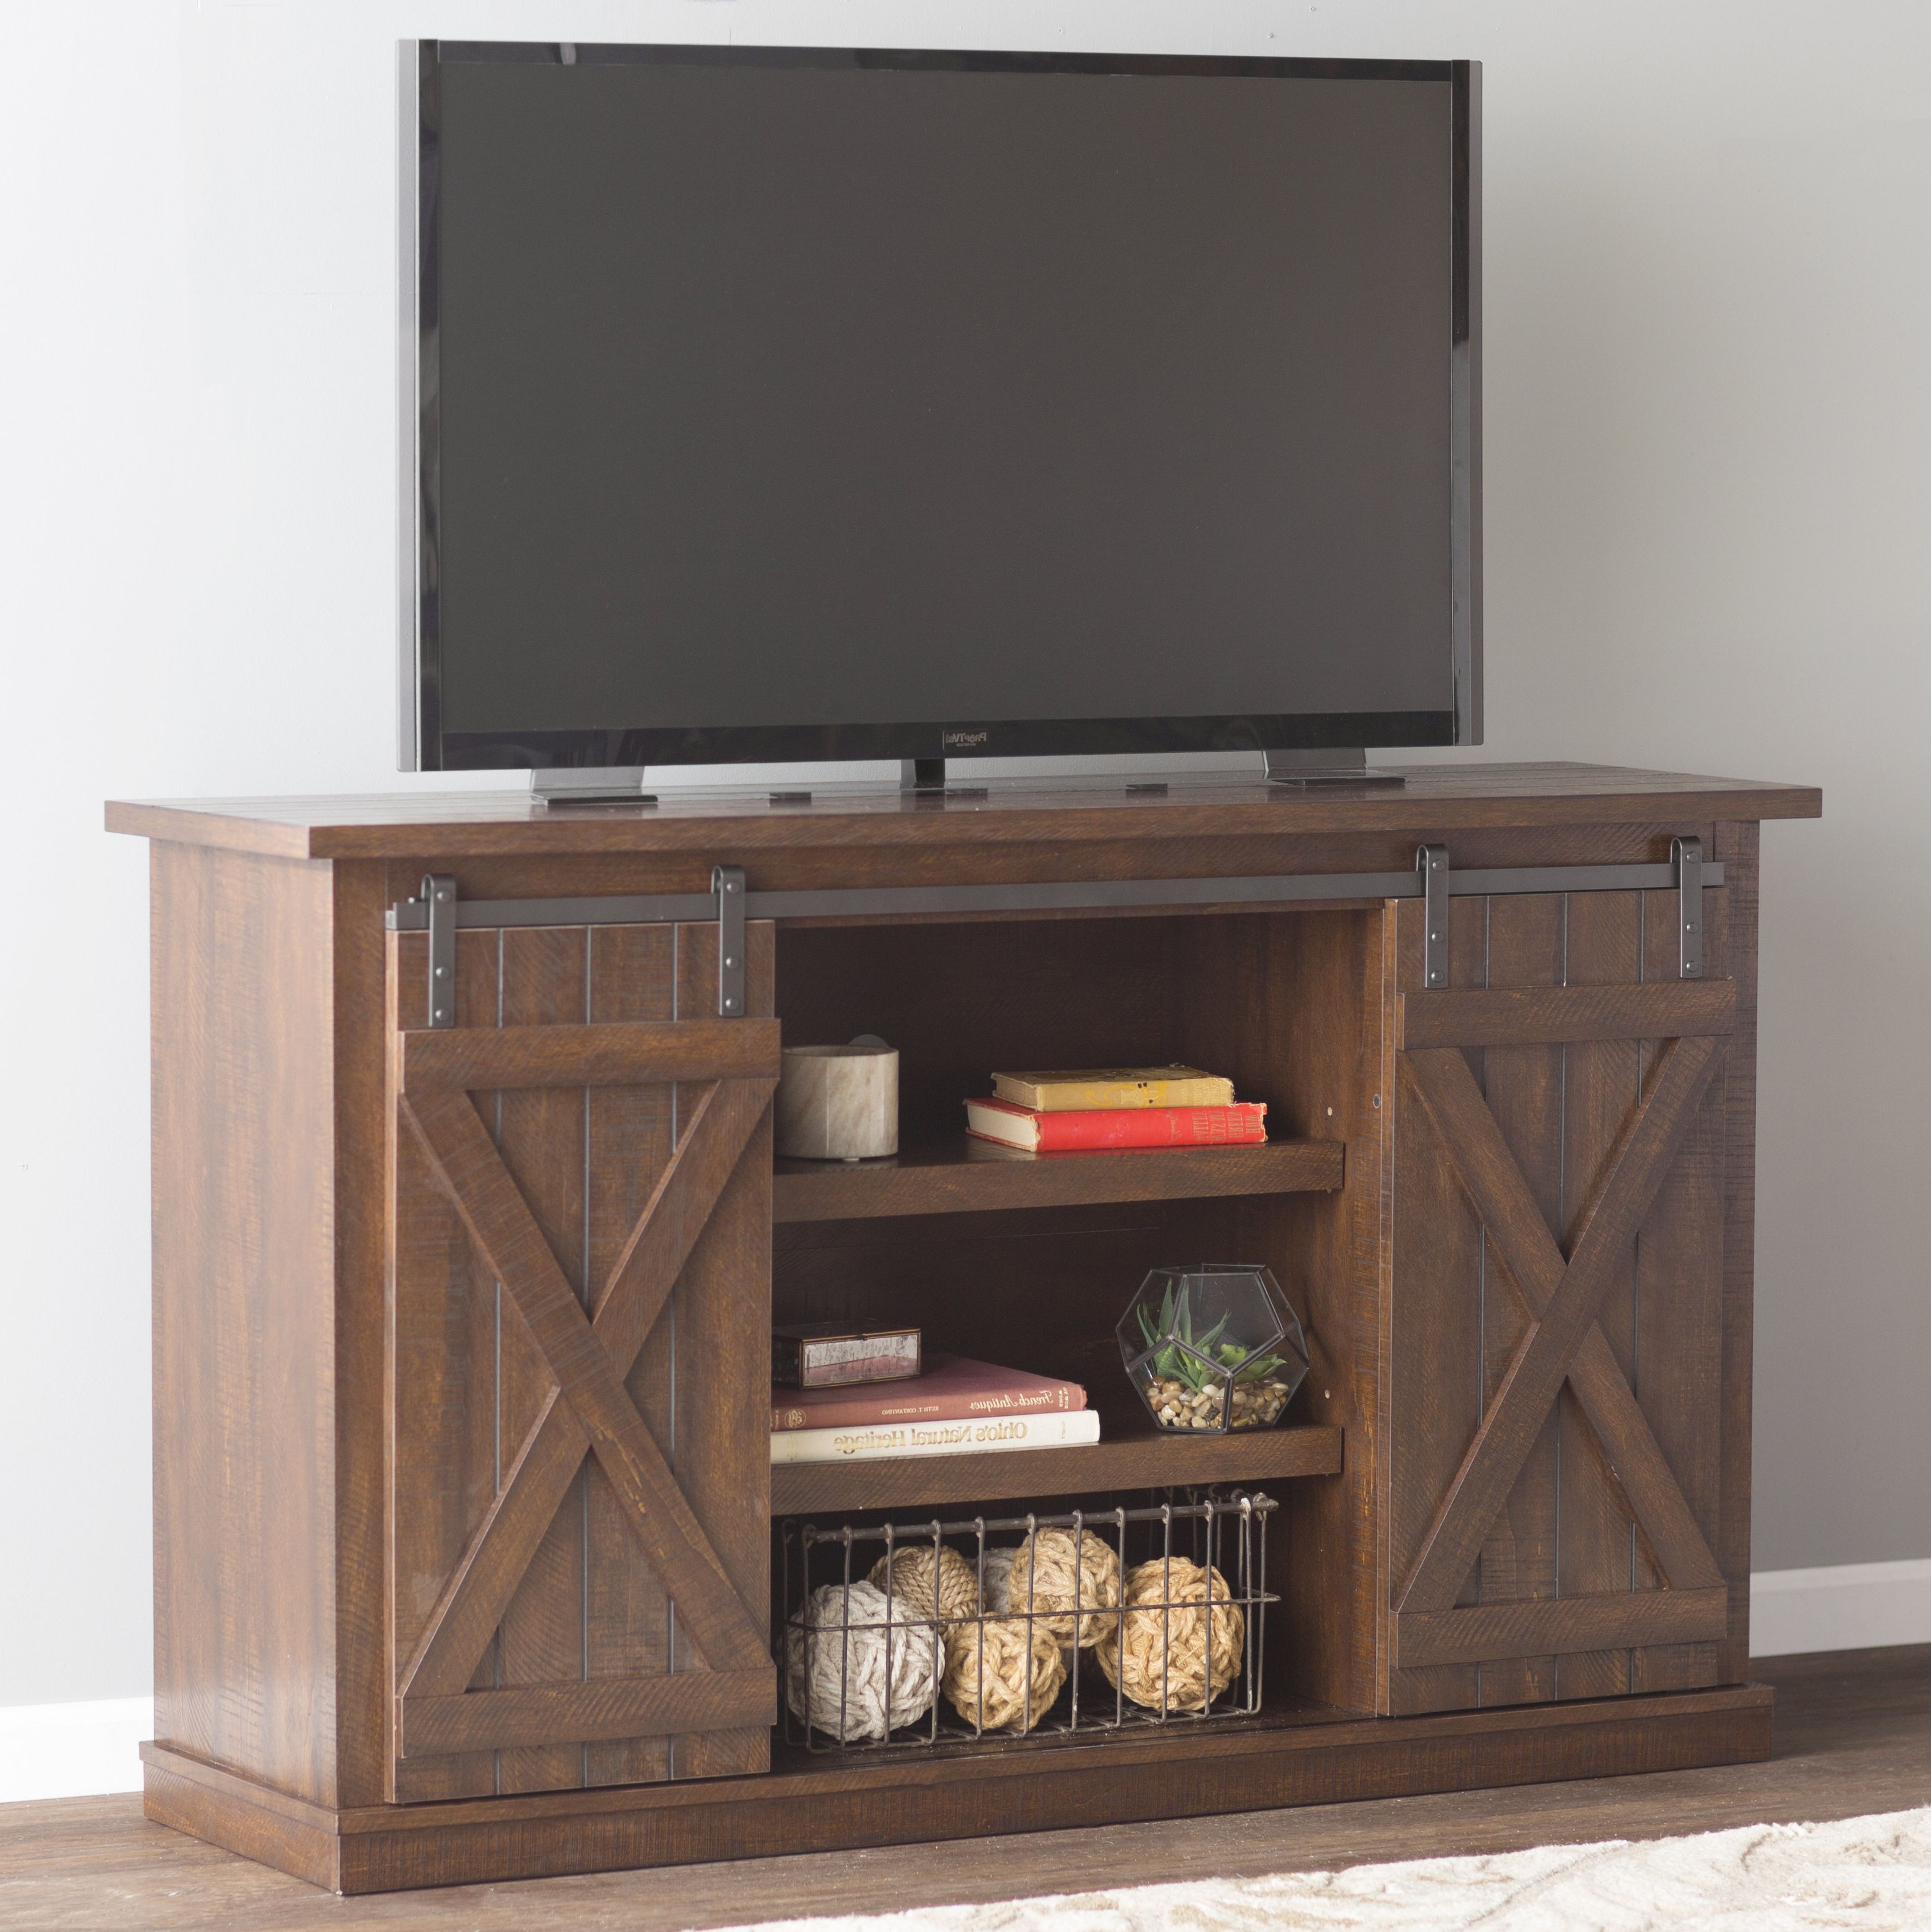 Wayfair Within Ducar 74 Inch Tv Stands (View 9 of 20)